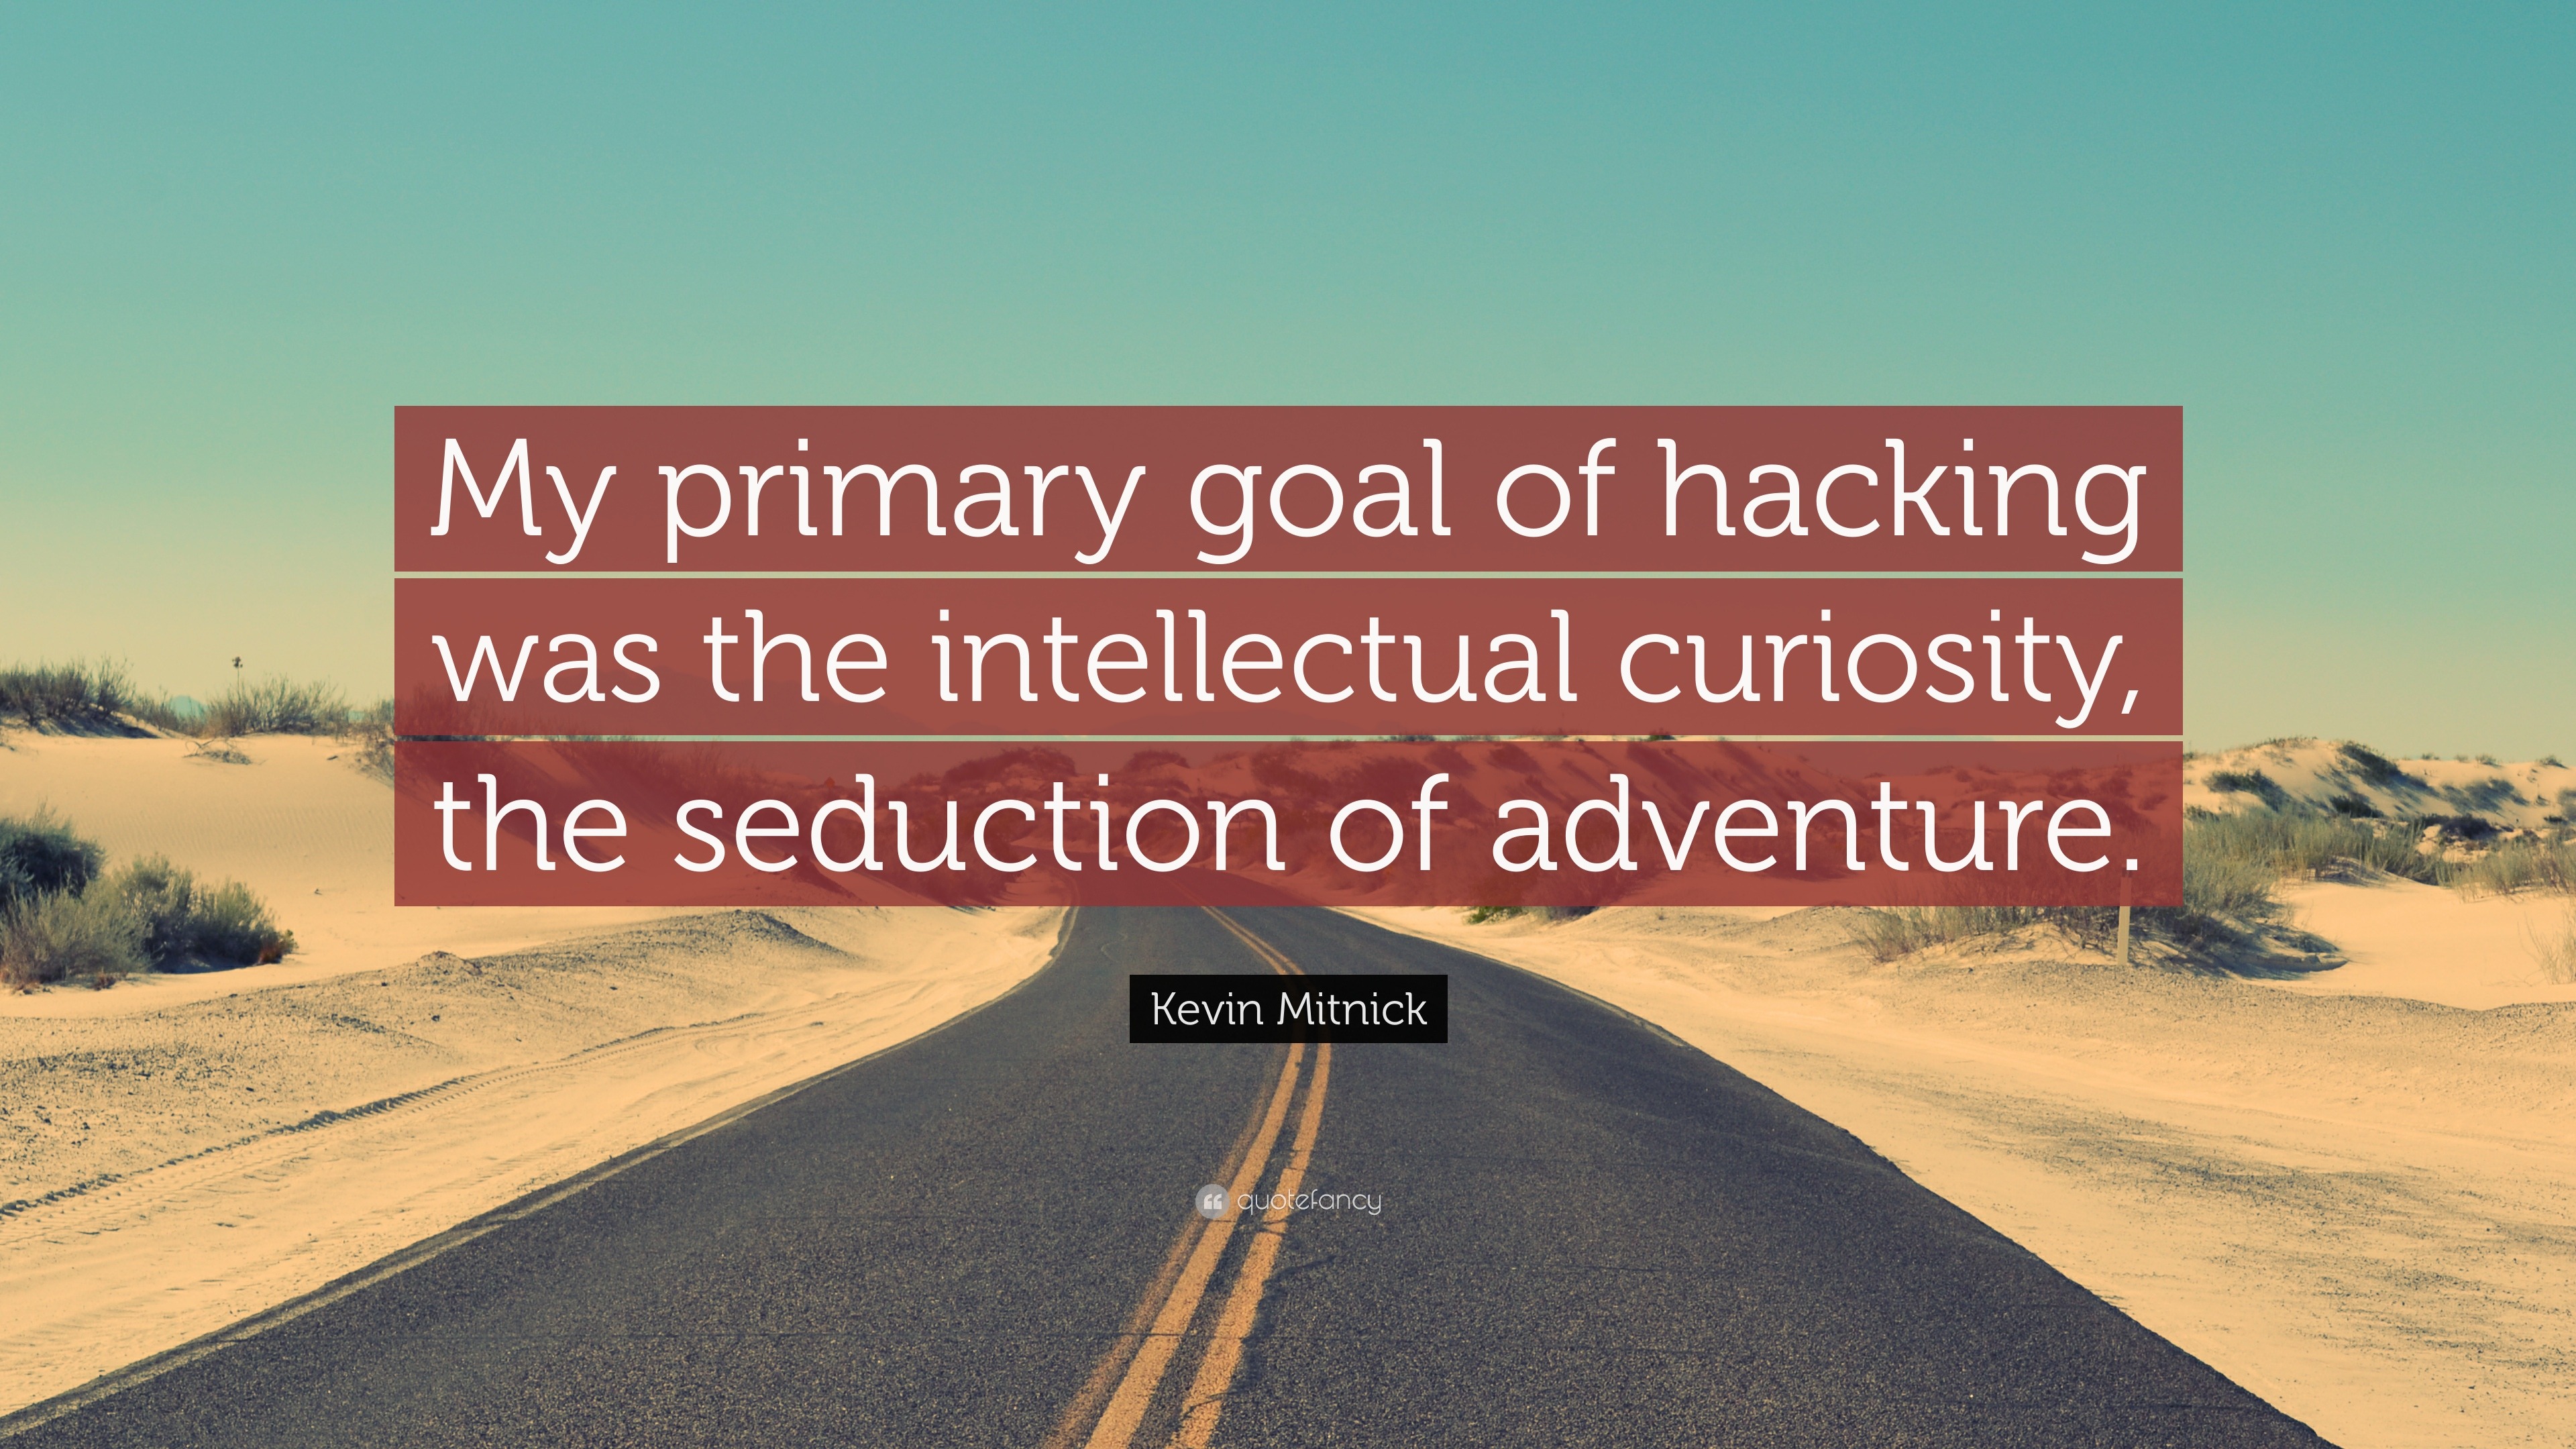 Kevin Mitnick Quote “My primary goal of hacking was the intellectual